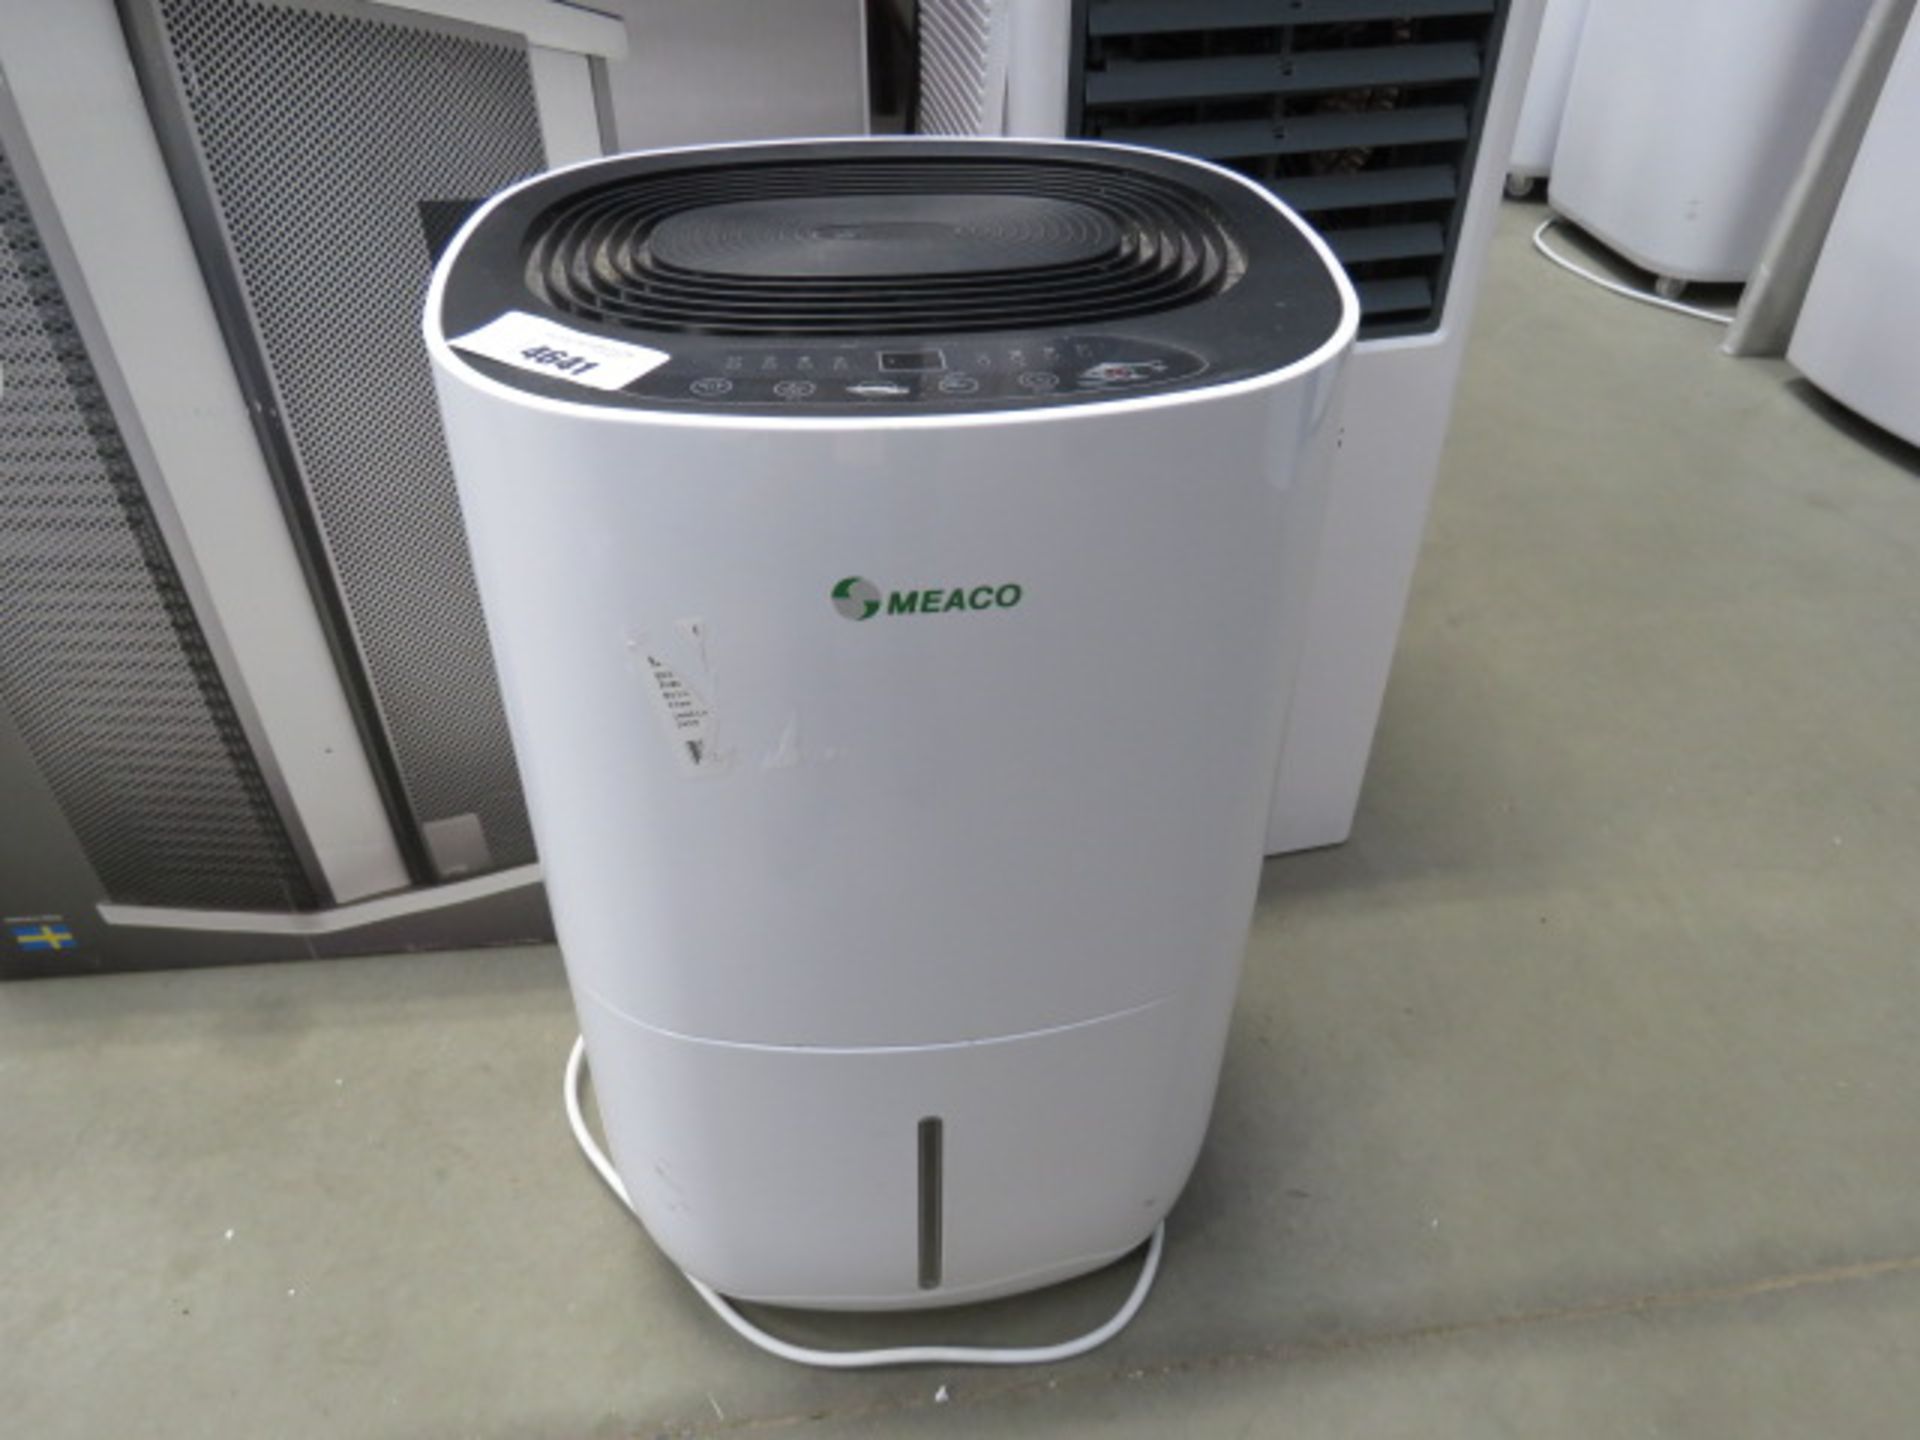 Meaco dehumidifier Deemed to be working, no error codes